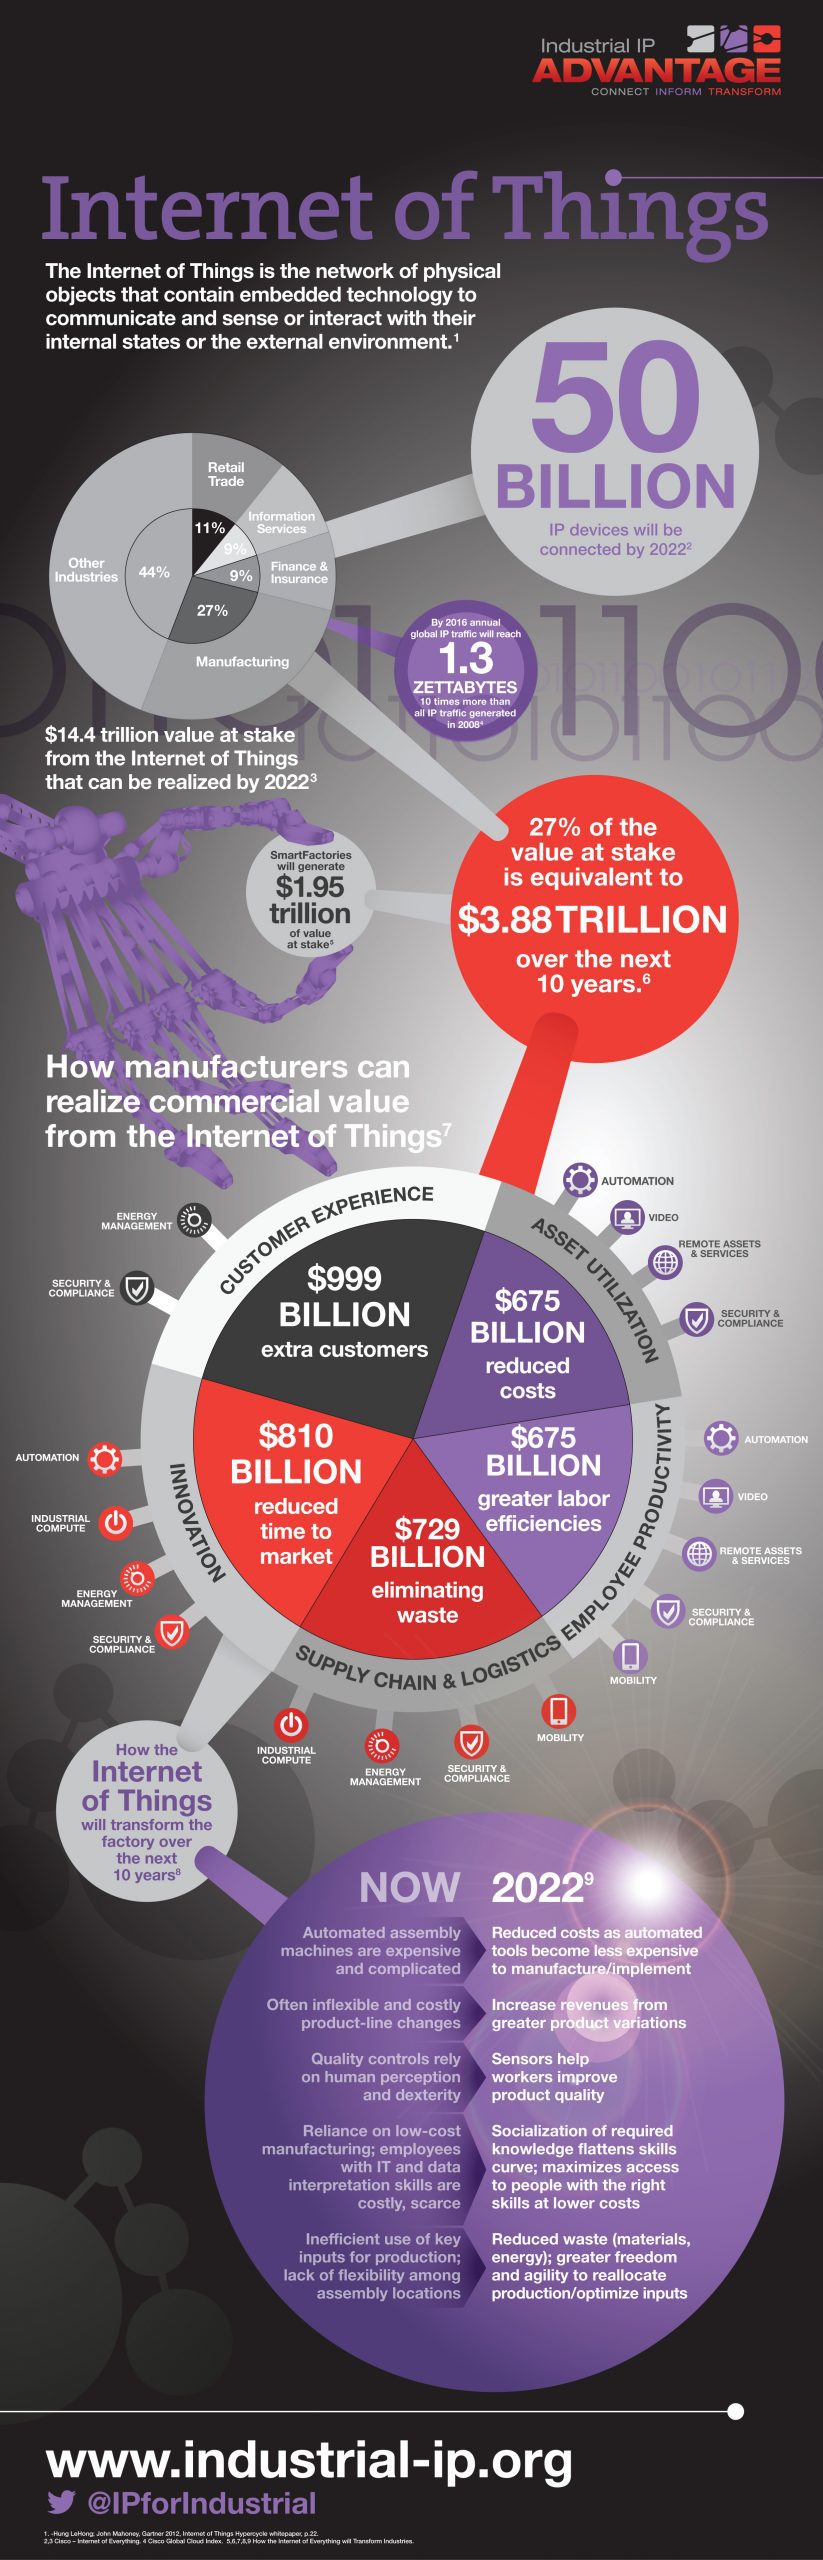 What Is The Value Of The Internet Of Things - Infographic